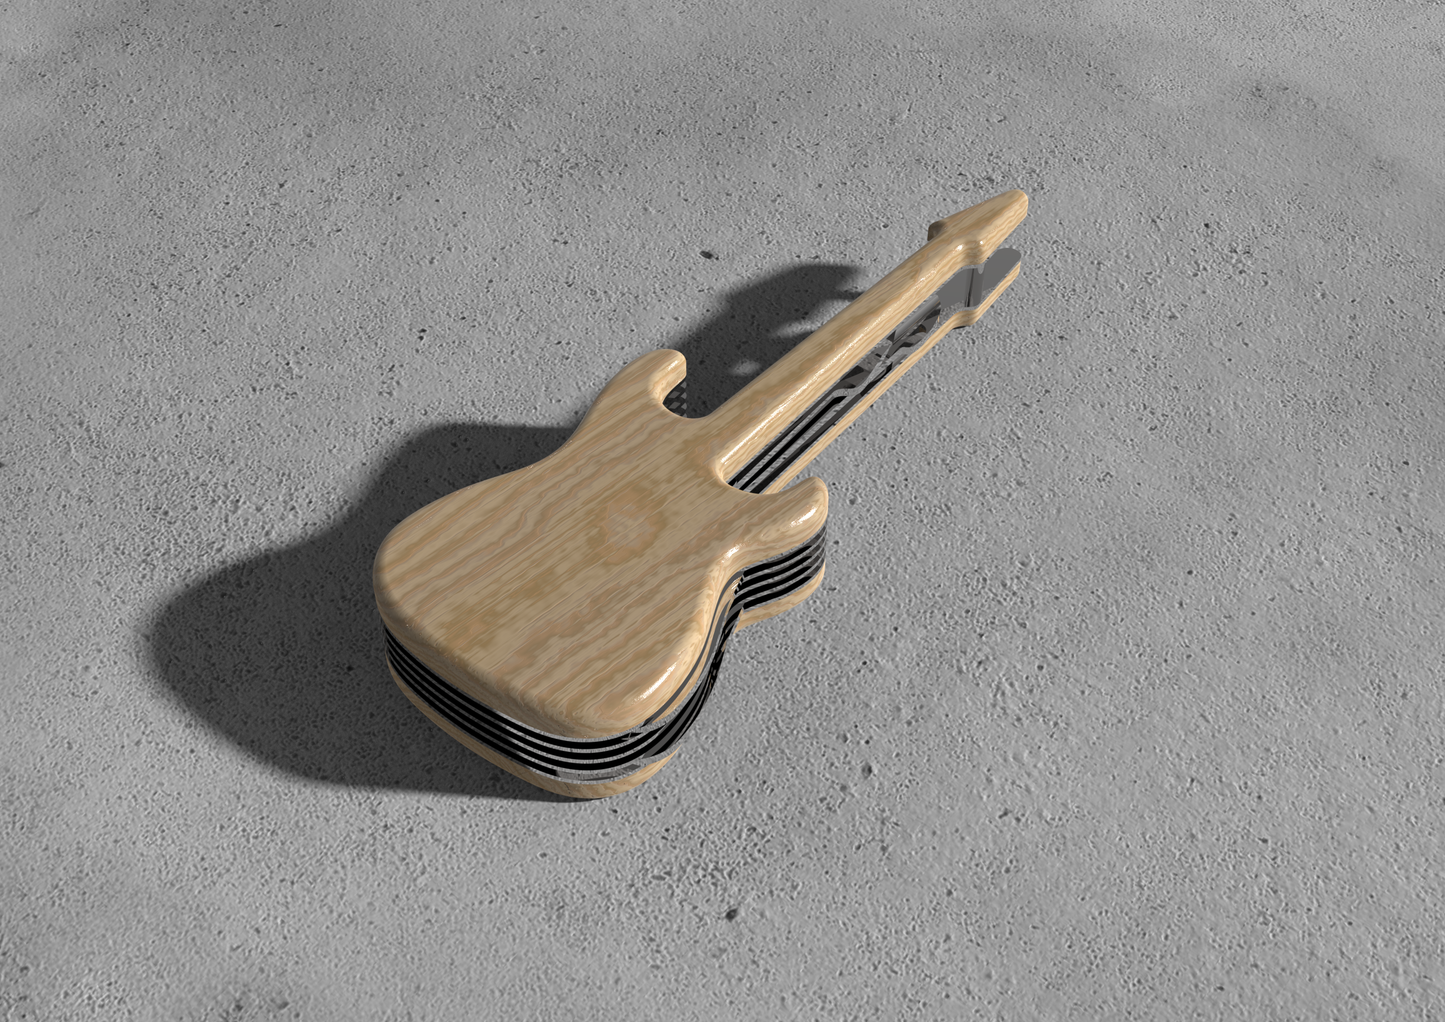 Guitar Multitool on a concrete background.